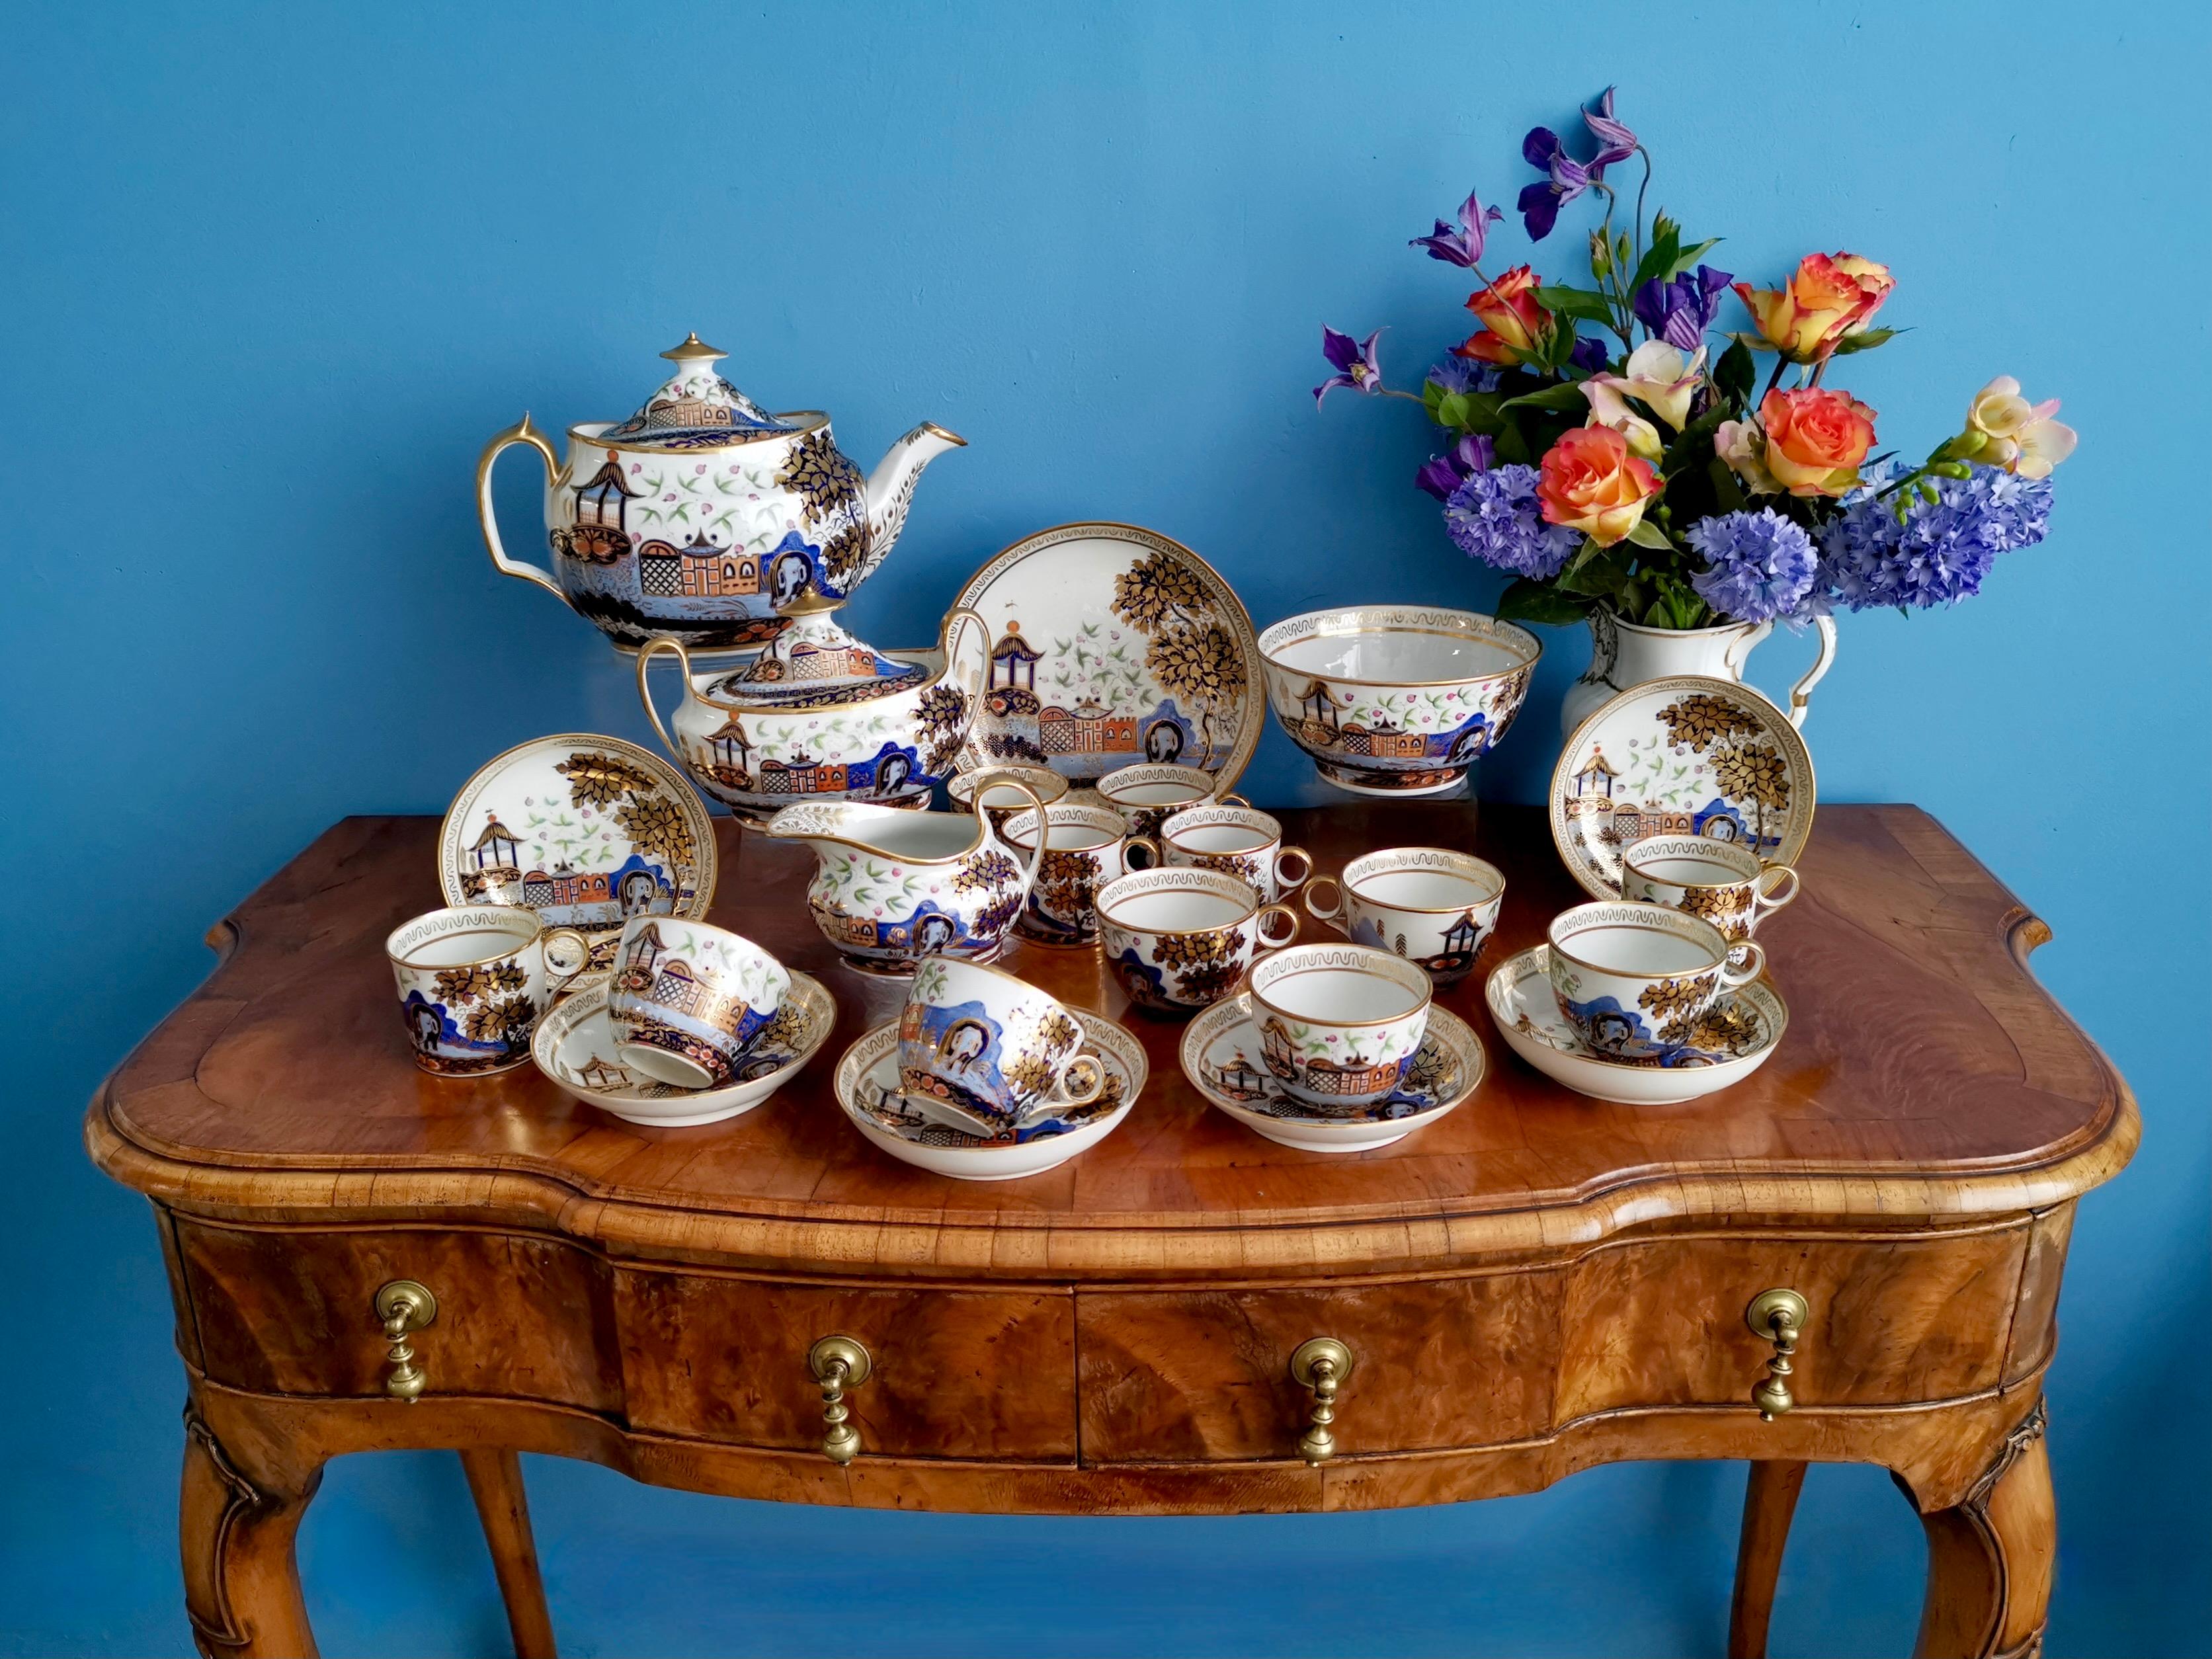 This is gorgeous teacup and saucer made by New Hall around the year 1815. The set is decorated in the super-charming and popular but very rare Elephant pattern.

We have an entire tea service for 6 available, as well as several individual tea and